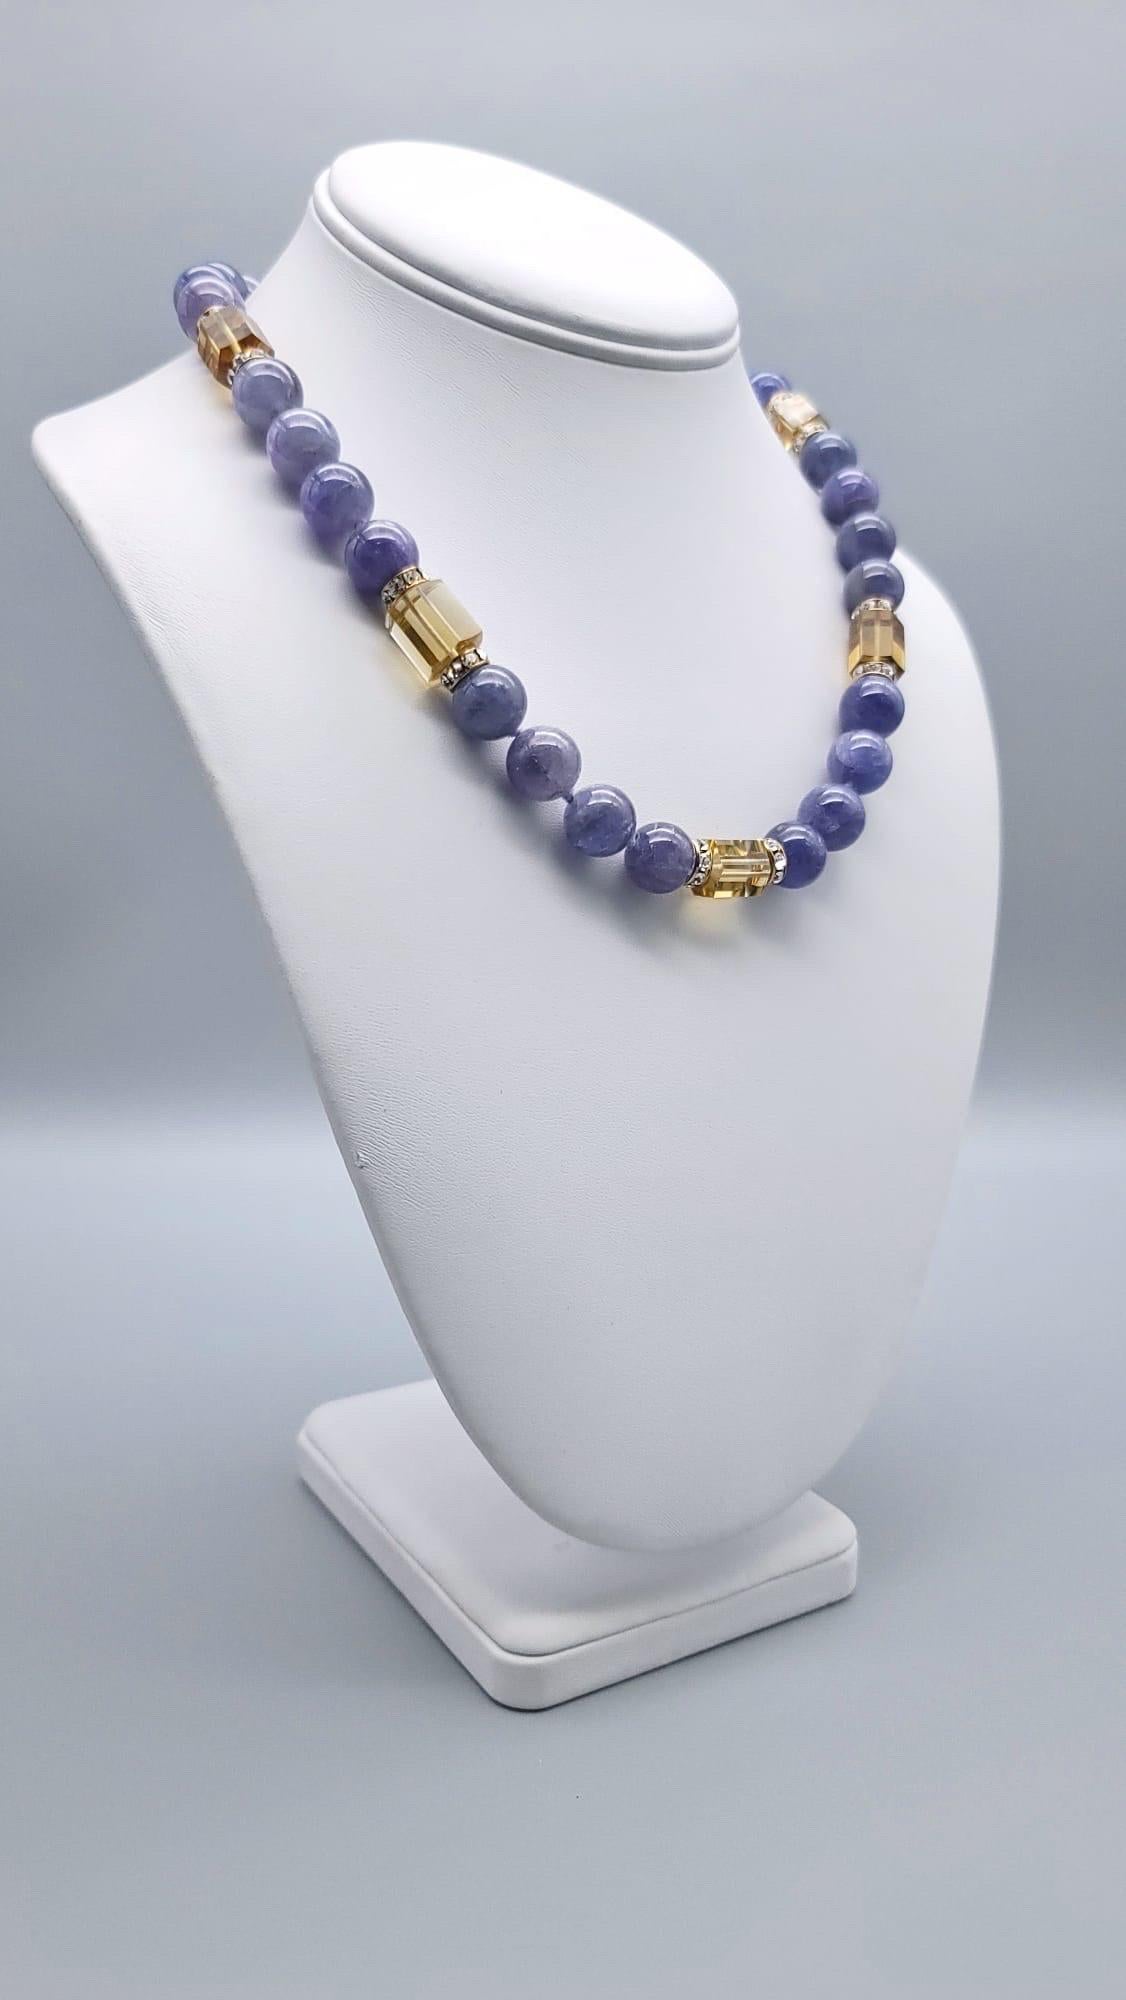 One-of-a-Kind
This Tanzanite and Quartz stunner necklace is the perfect combination of elegance and sophistication. With its 12mm polished Tanzanite beads spaced between square-cut citrine Quartz rods and c.z and vermeil roundels, it's sure to turn